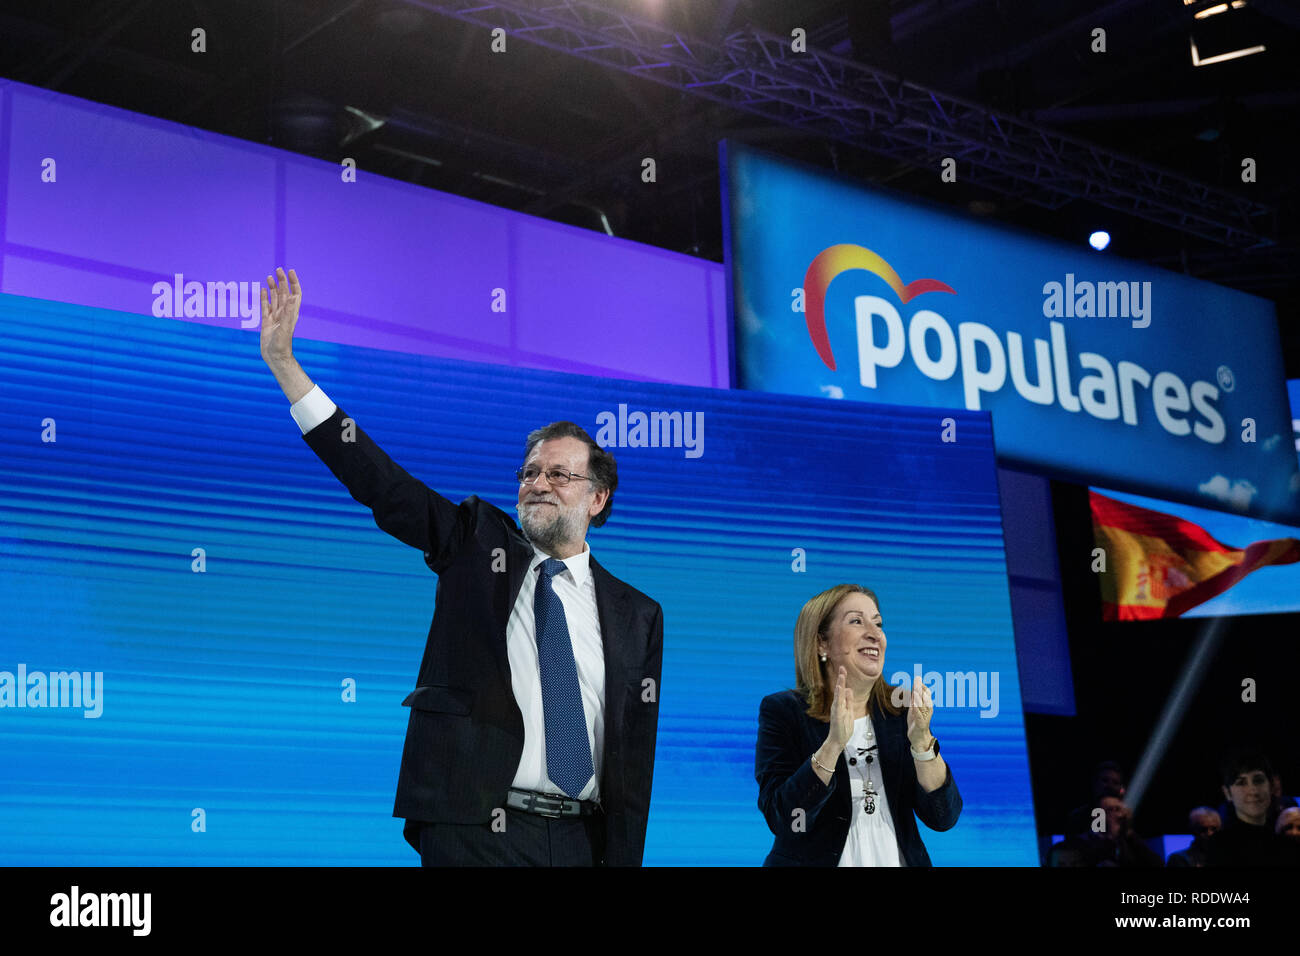 January 18, 2019 - Madrid, Spain - Mariano Rajoy and Ana Pastor greeting.The PP celebrates its national convention to establish the main lines of its electoral program for the three elections scheduled for May 26 and are key to gauge the leadership of the popular president, Pablo Casado. (Credit Image: © Jesus Hellin/ZUMA Wire) Stock Photo